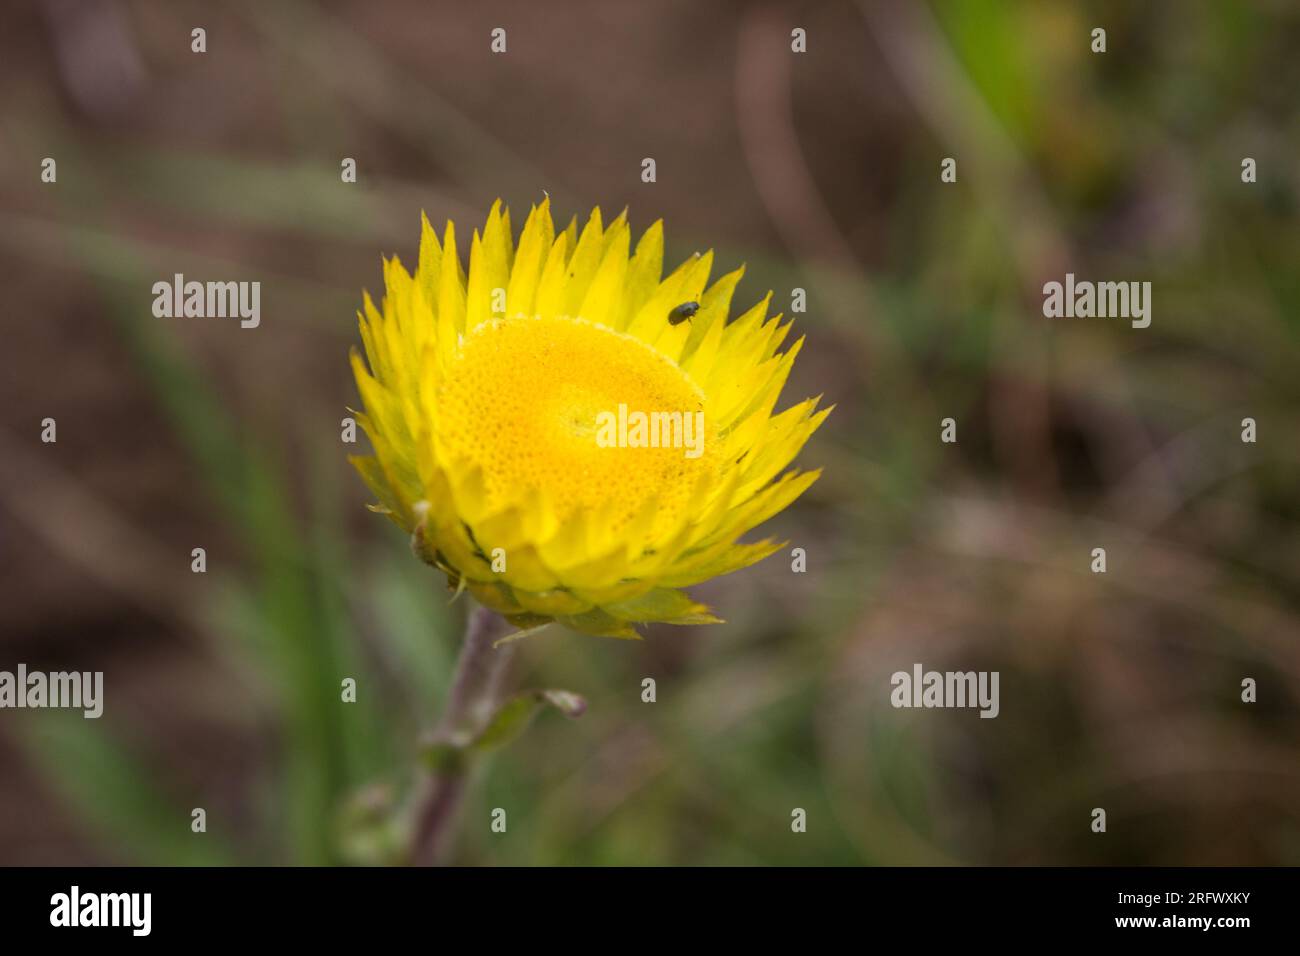 Close-up view of a single flower of a yellow Helichrysum Stock Photo